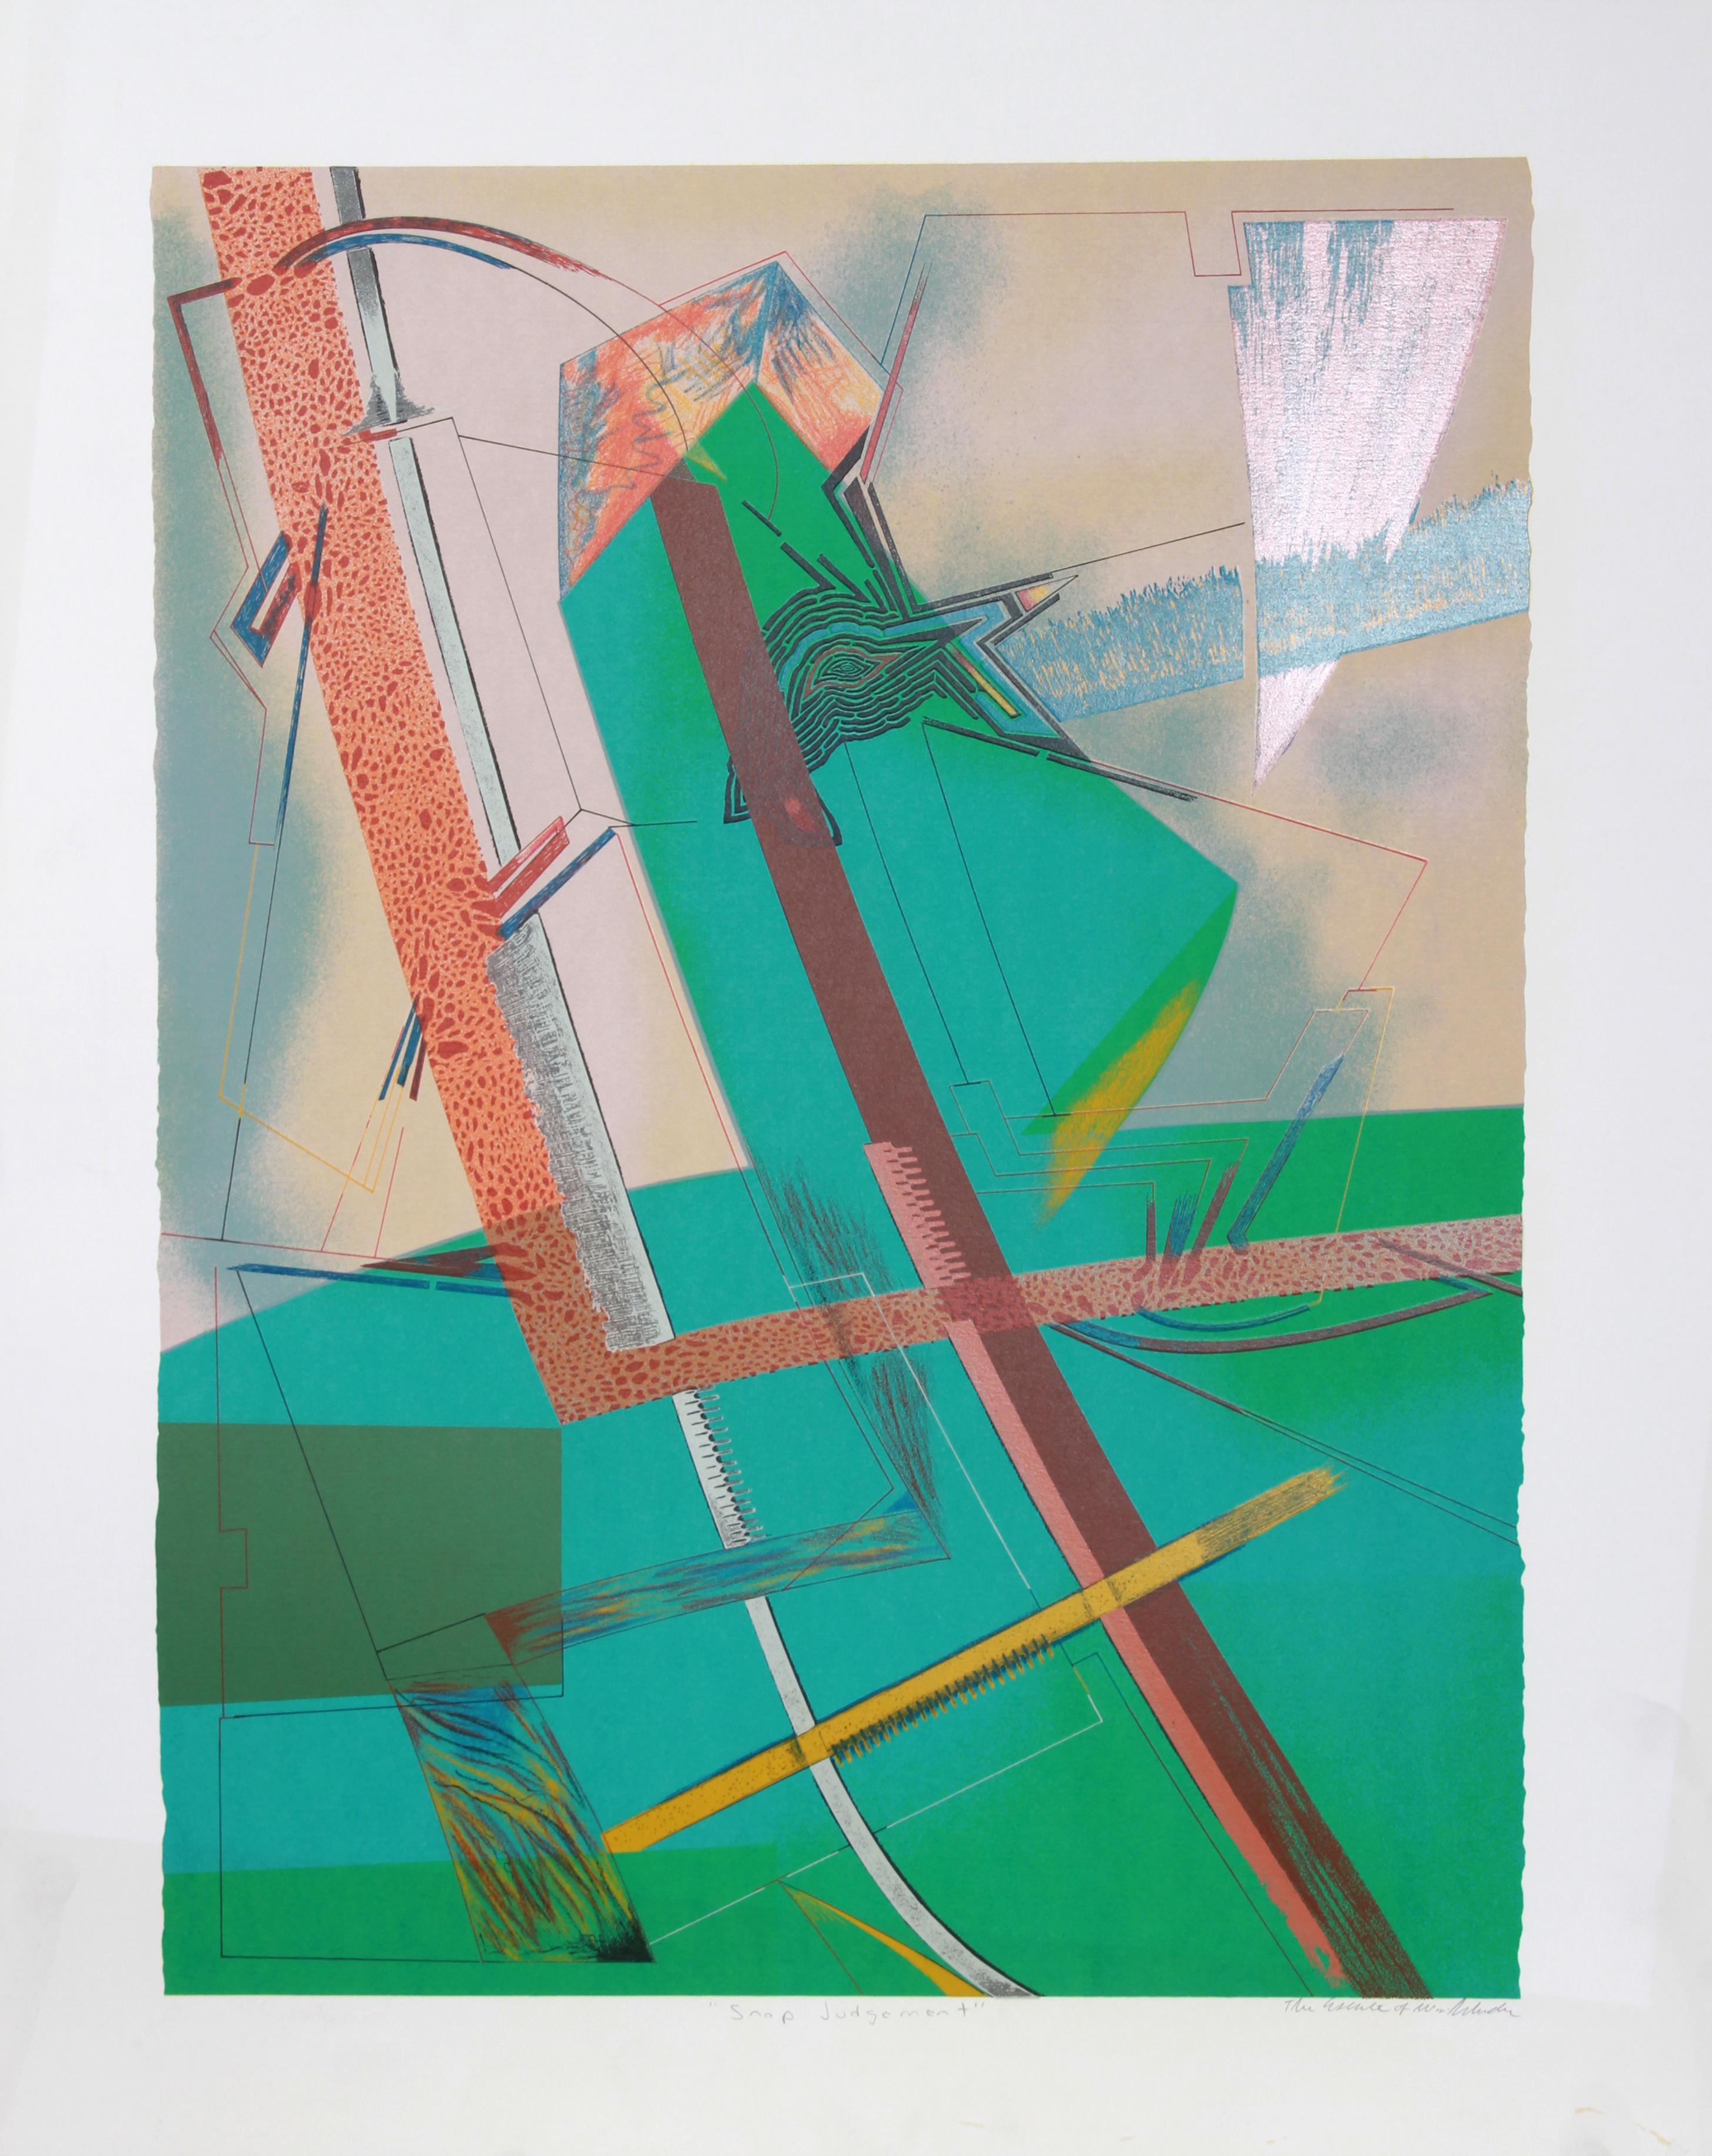 Along with several other of his abstract geometric prints, William Schwedler's fusion of tropical, bright background colors with major angular forms at the center of the composition brings the scene to life. 

Snap Judgment
Artist:  William